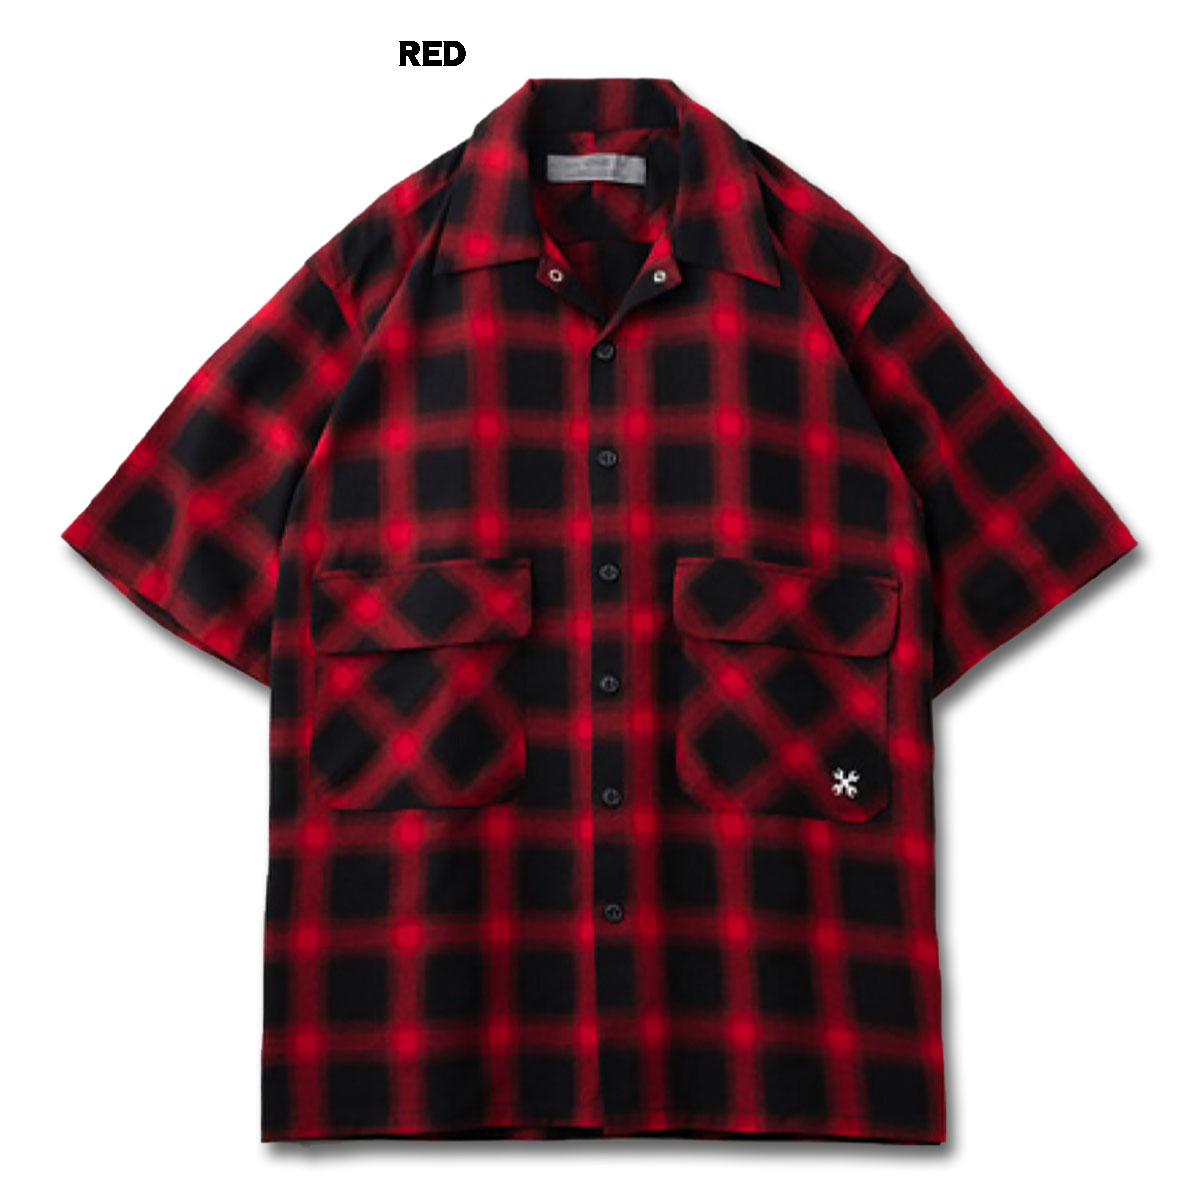 BLUCO(ブルコ) OL-21-004 OMBRE BIG POCKET SHIRT S/S 3色(NVY/GRY/RED)☆送料無料☆｜pinsstore｜02